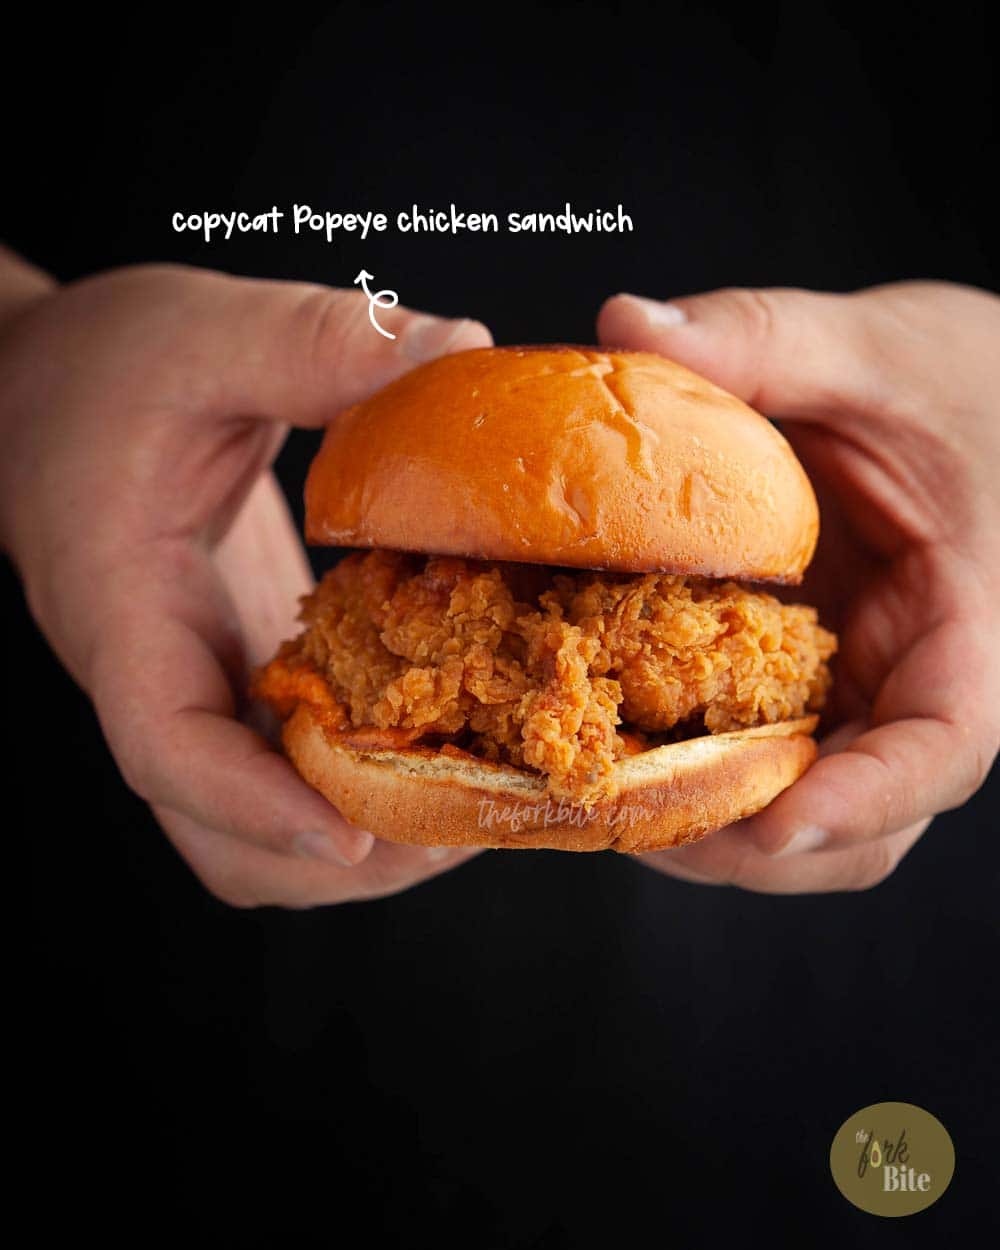 One of the secrets to Popeyes chicken sandwich is the brine. Doing this extra step yields the real flavor and juiciness of this iconic chicken sandwich.